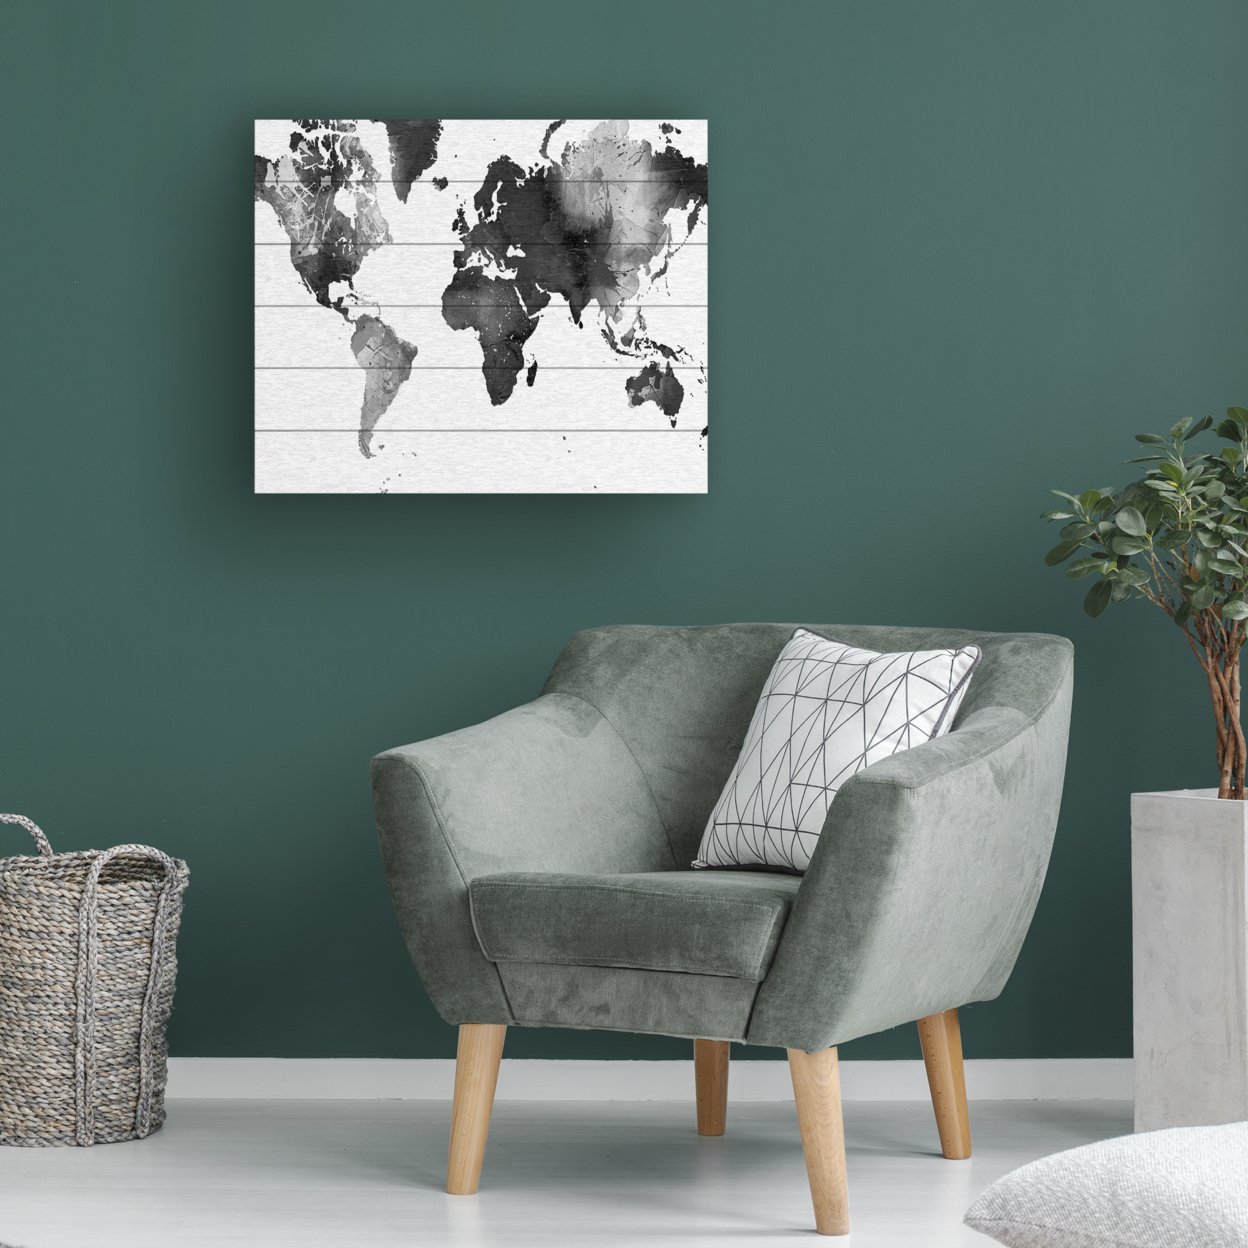 Wooden Slat Art 18 X 22 Inches Titled World Map BG-1 Ready To Hang Home Decor Picture